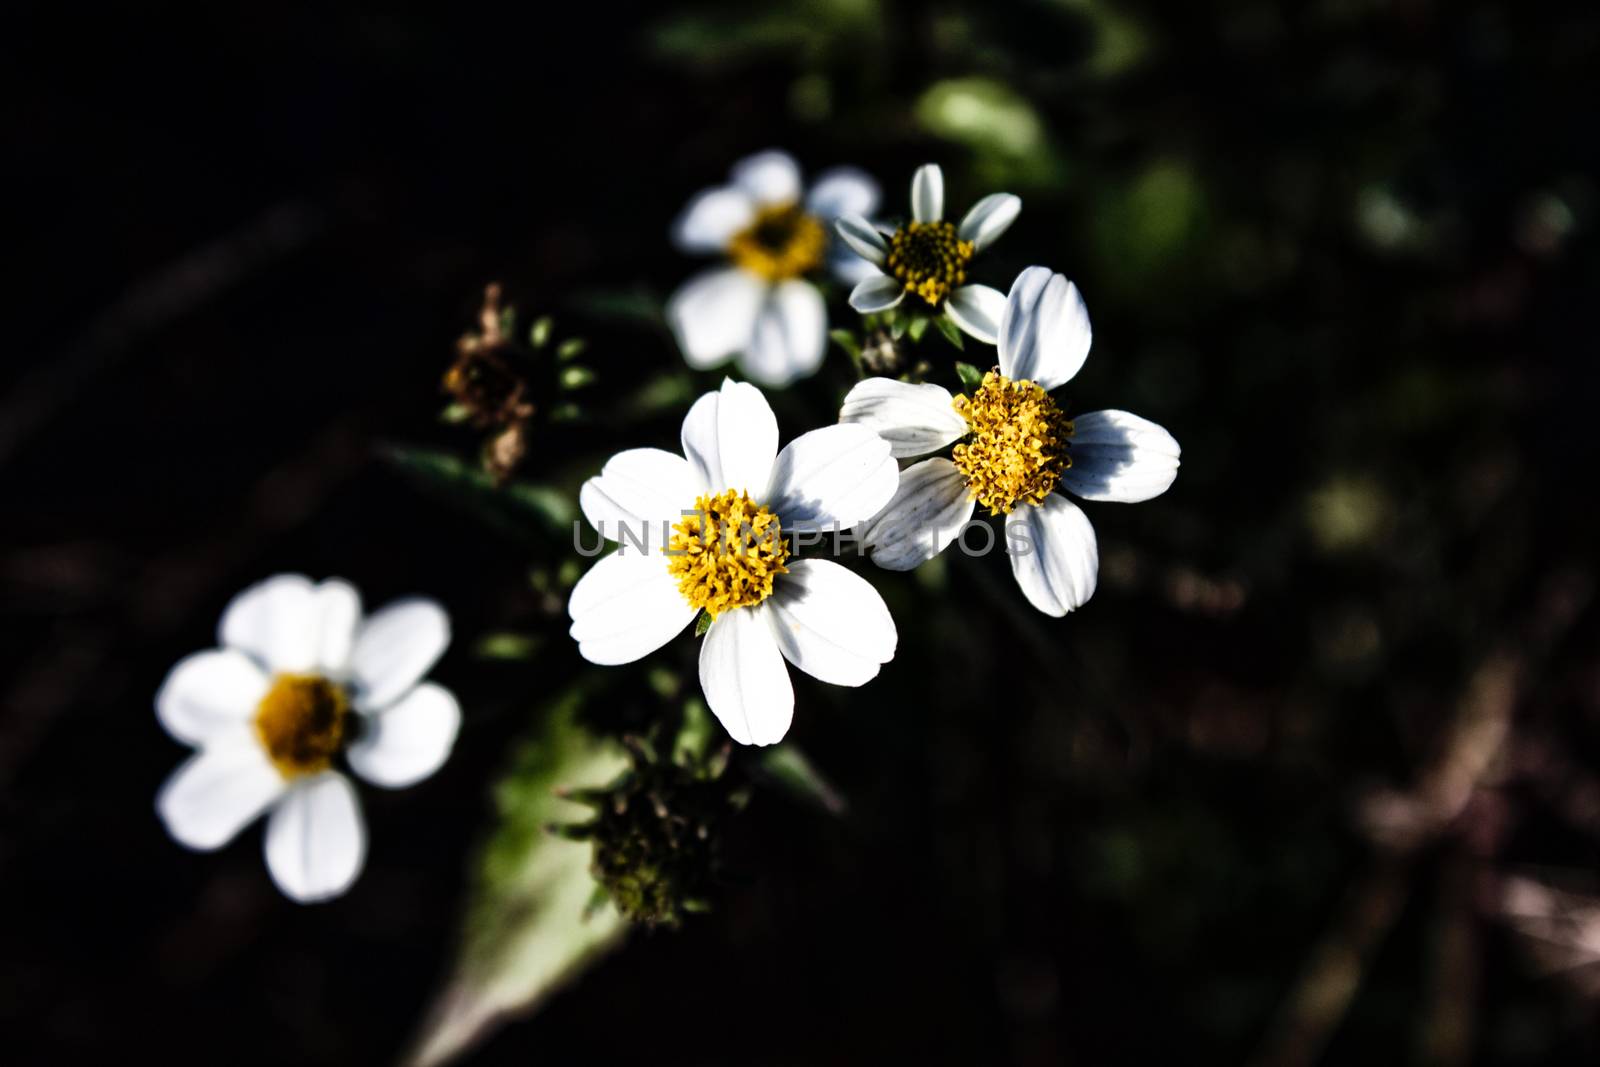 Group of white flowers, focus on foreground, with black background